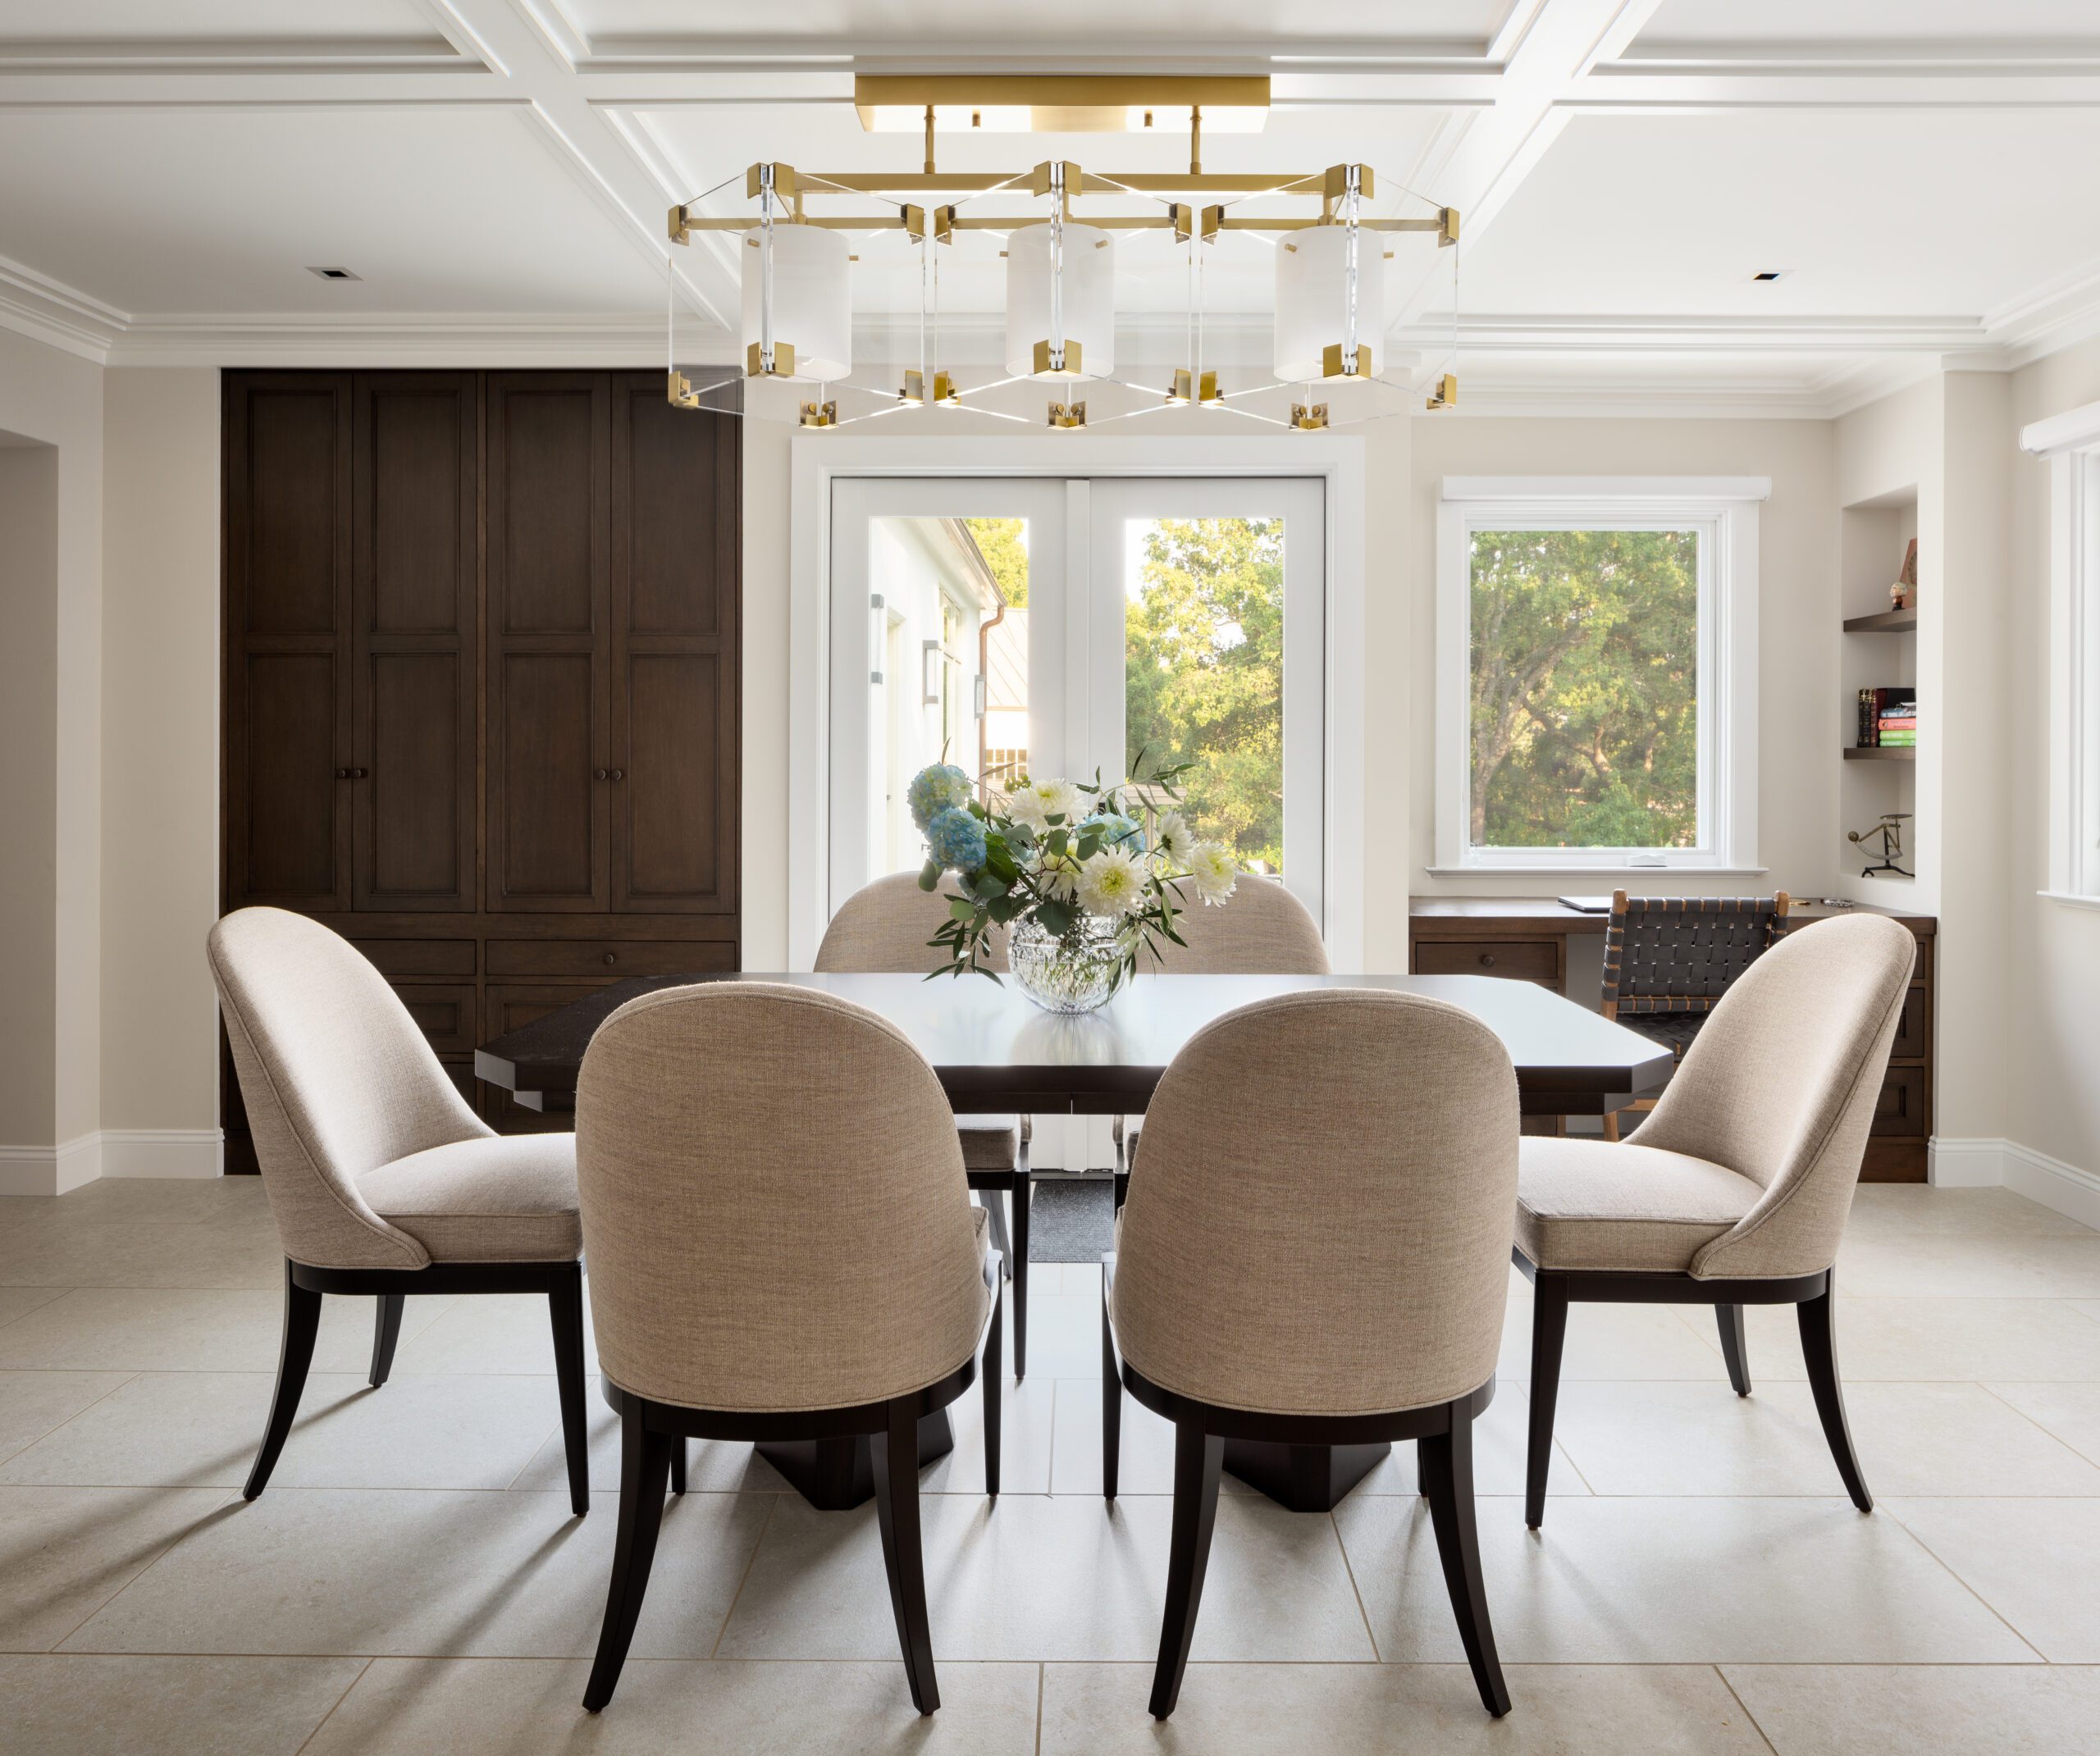 Condence Dining Room with Dark Wood Accents